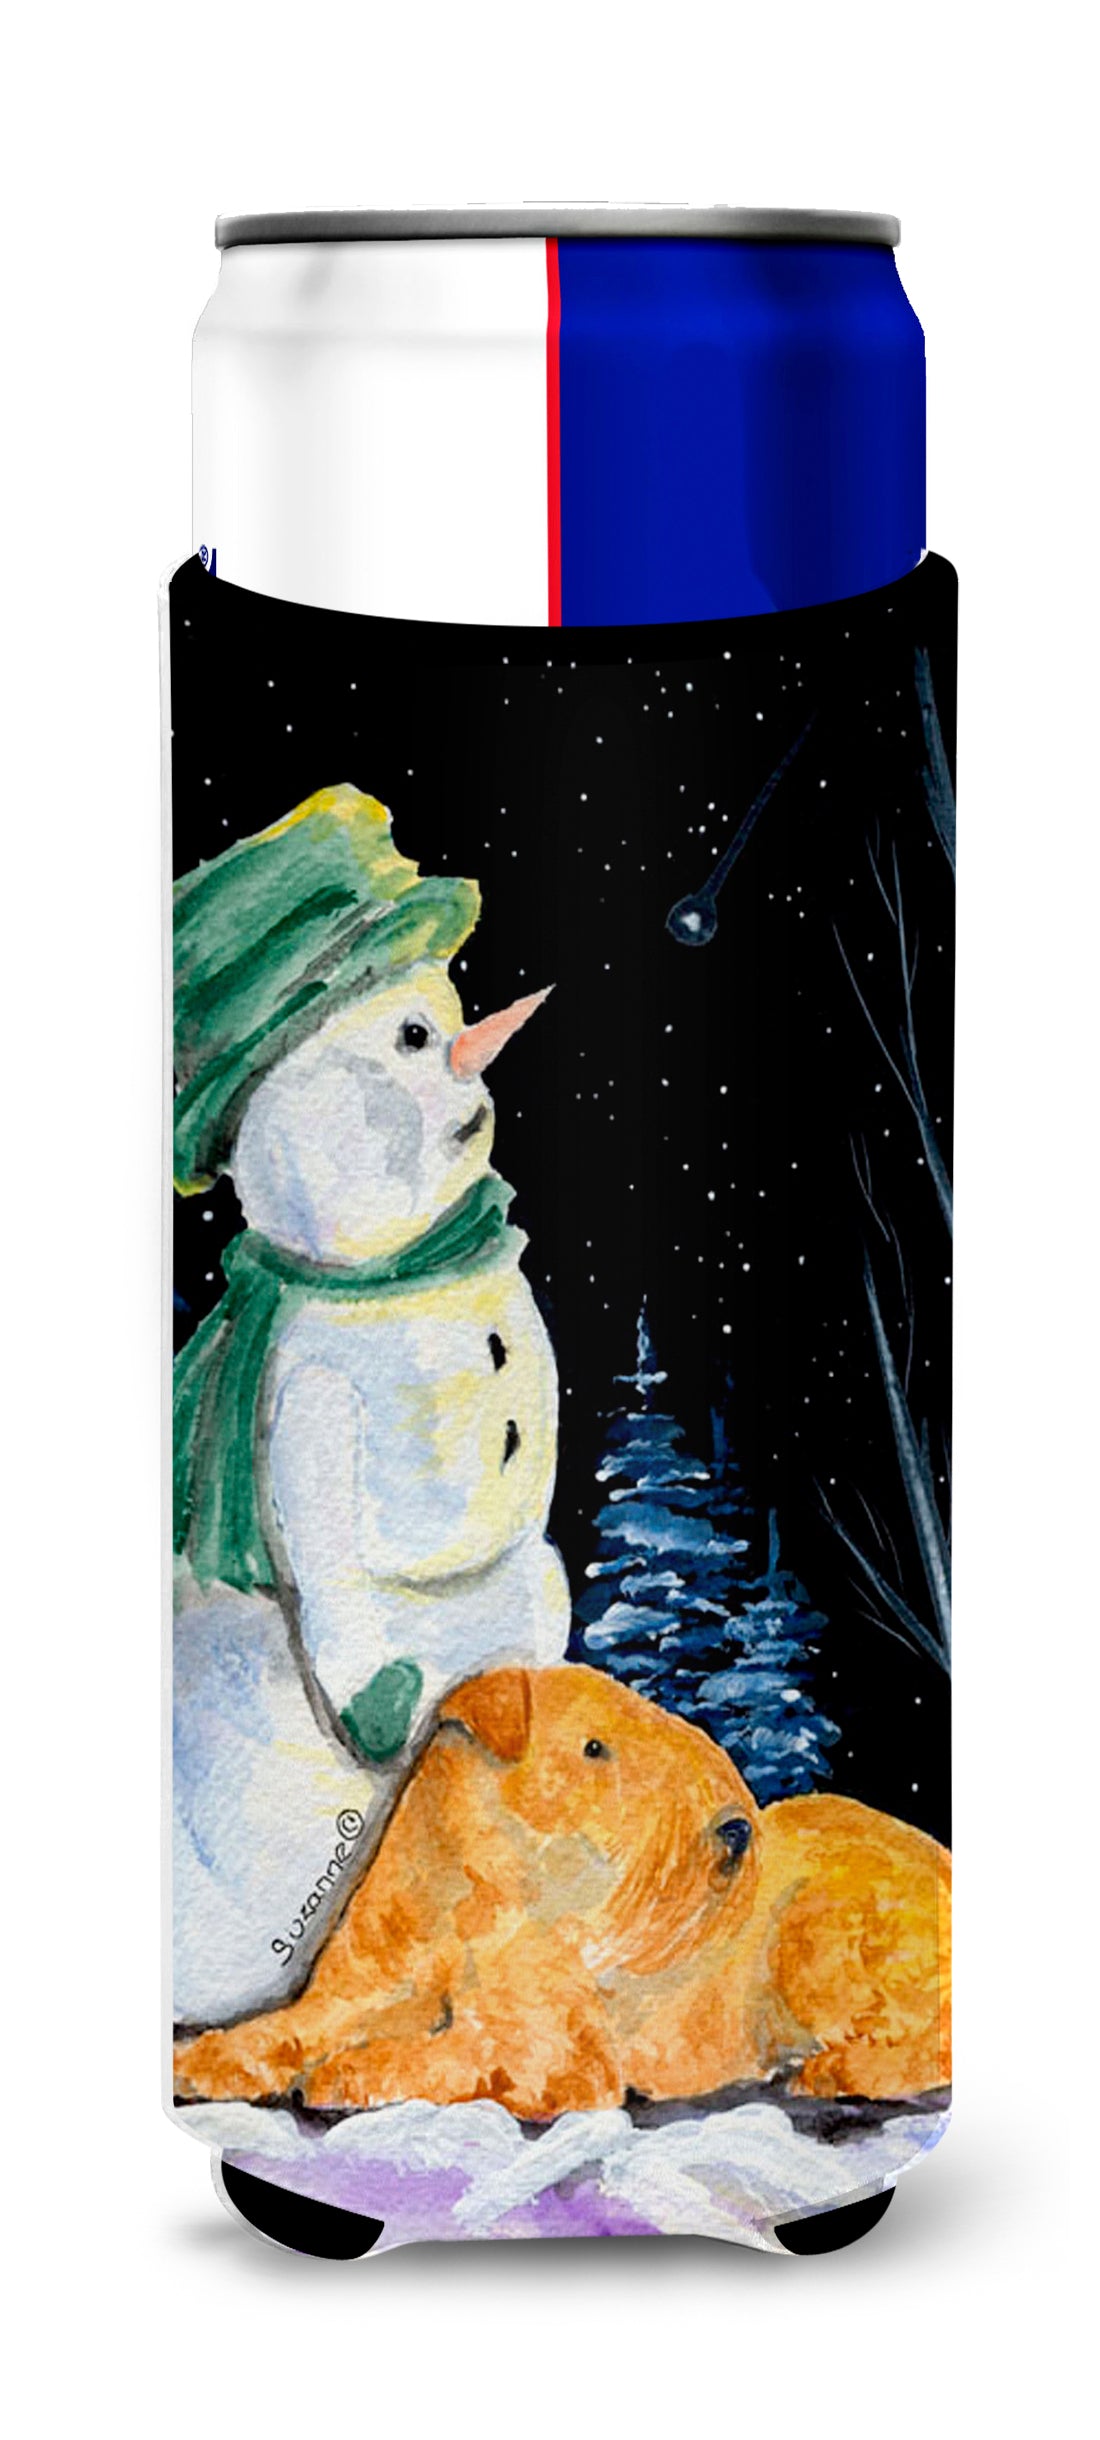 Snowman with Lakeland Terrier Ultra Beverage Insulators for slim cans SS8555MUK.